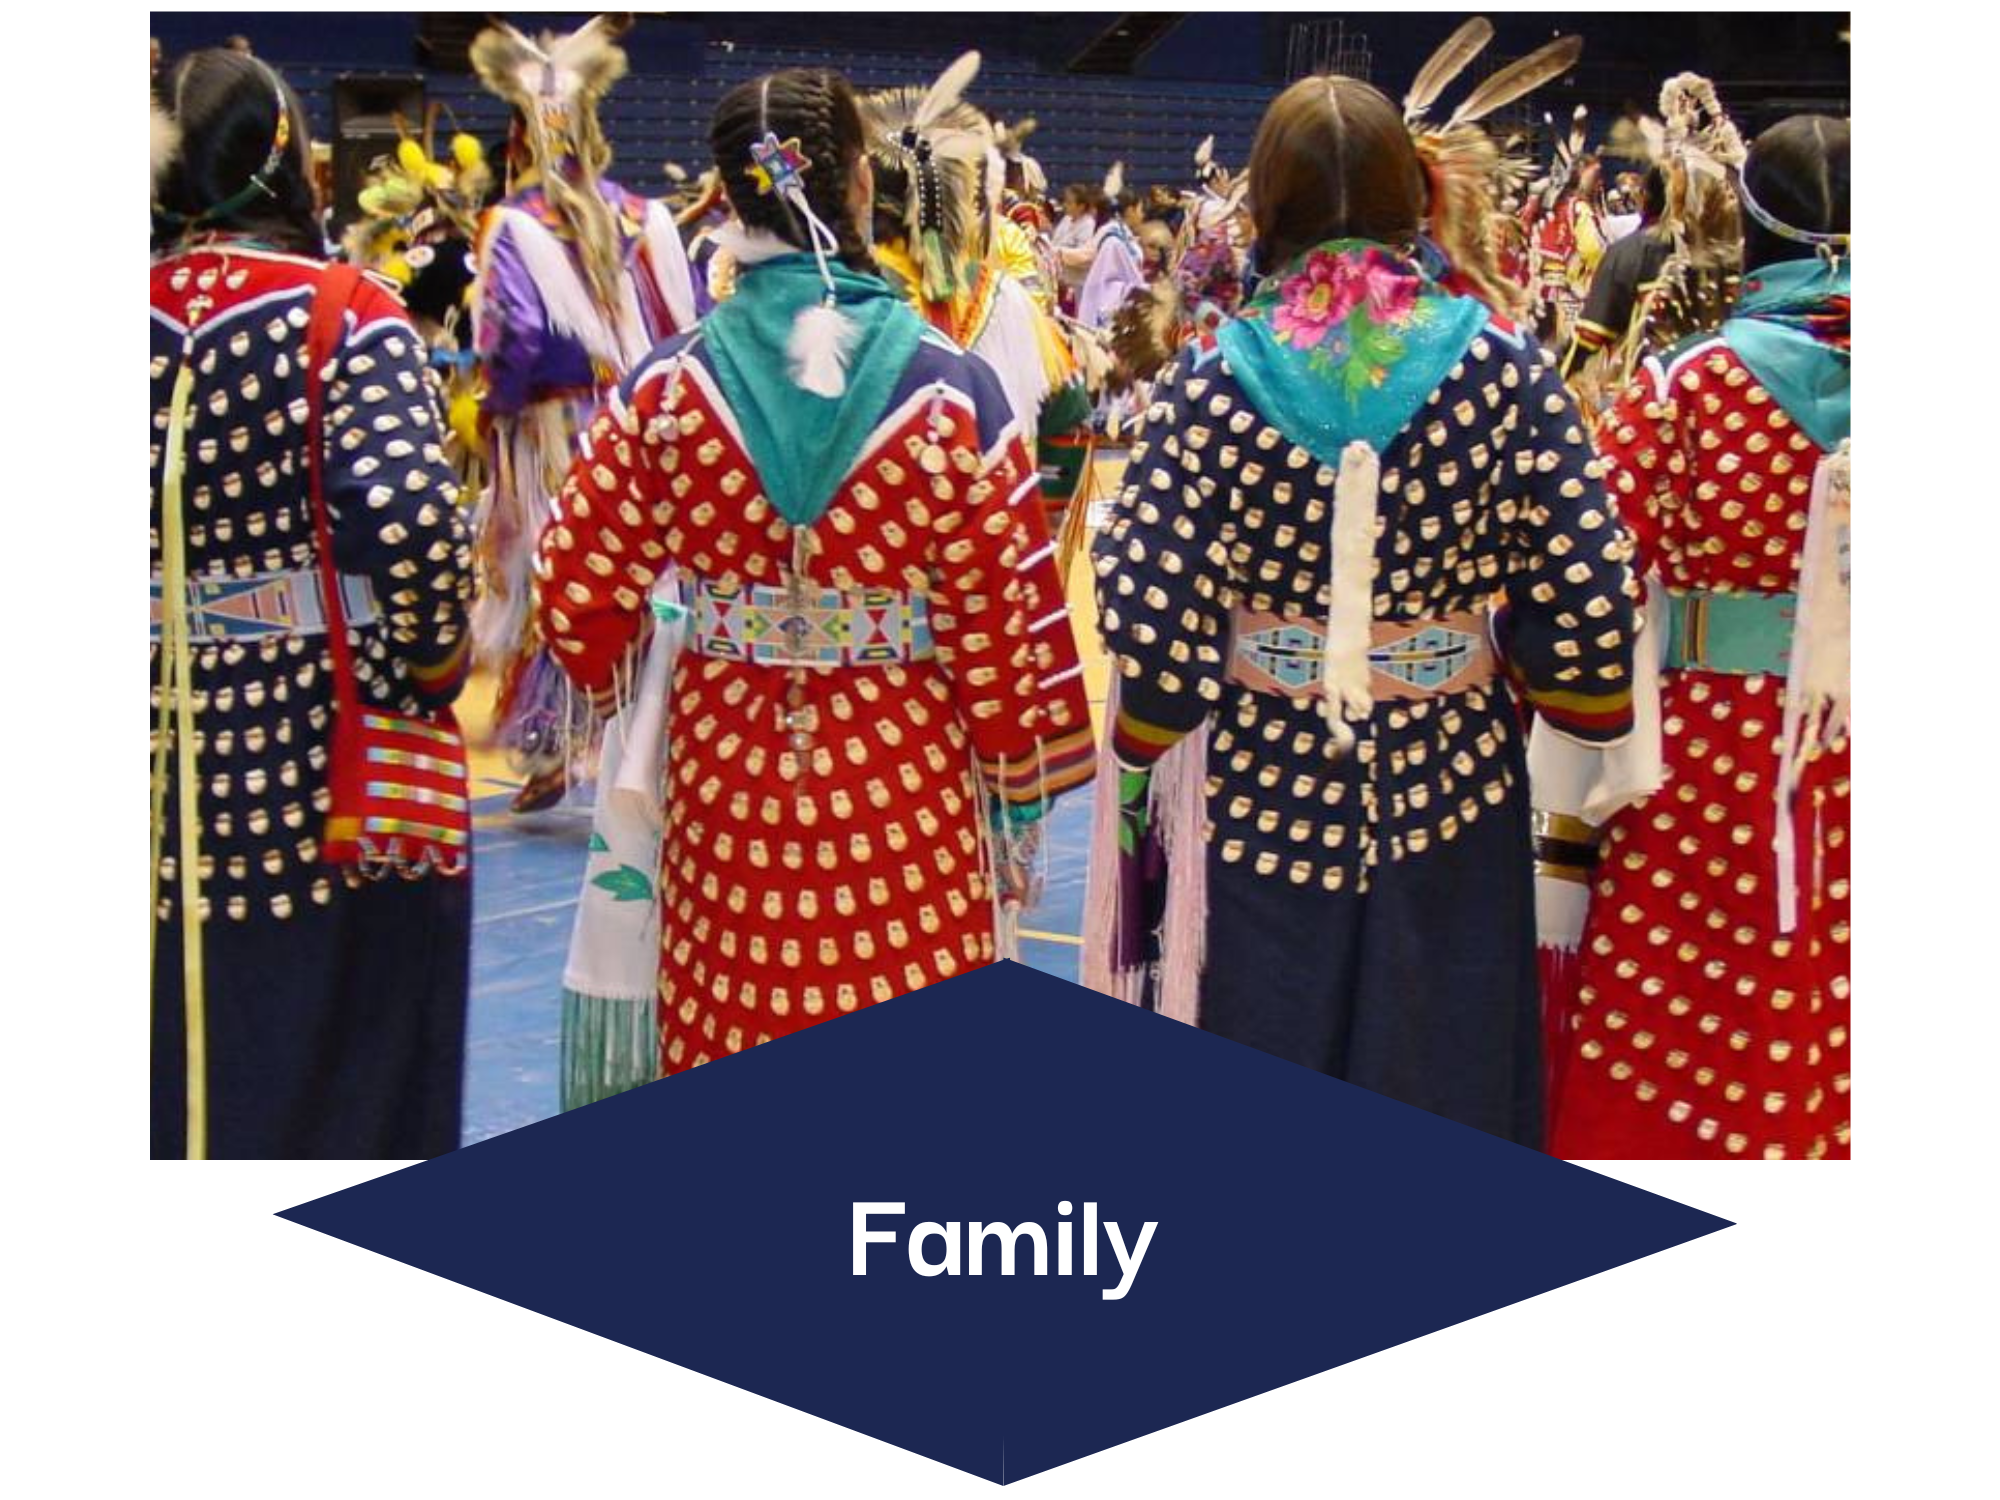 The Family section of the Cultural Values model, showing female dancers in traditional elk-tooth regalia at the MSU Powwow.